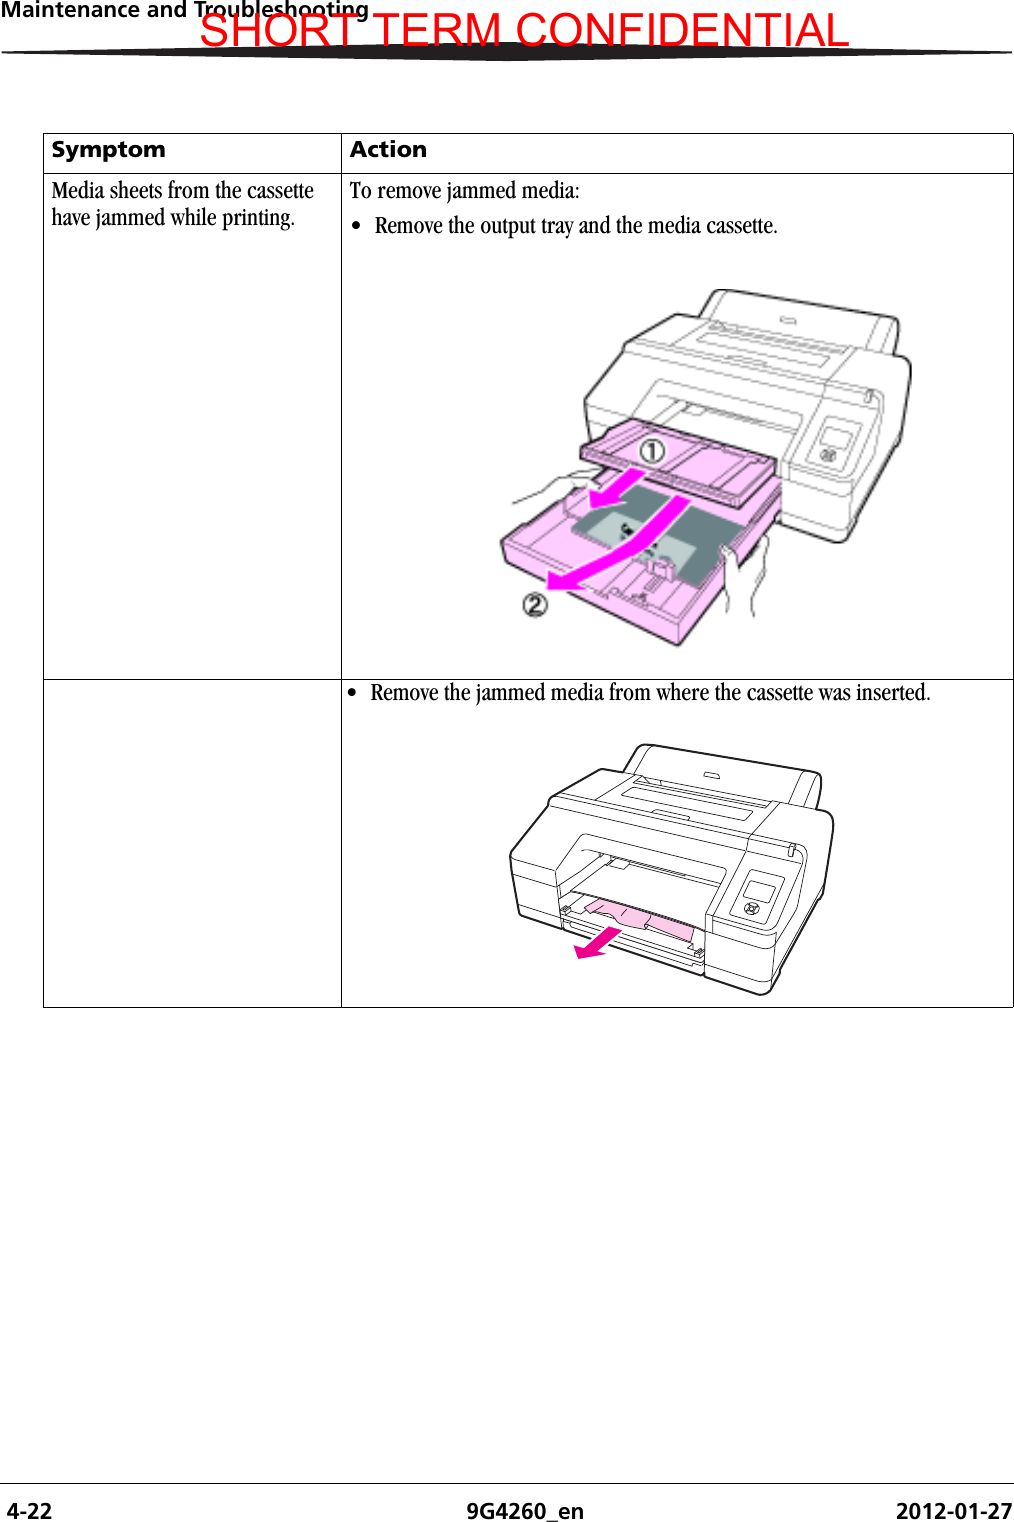  4-22 9G4260_en 2012-01-27Maintenance and TroubleshootingMedia sheets from the cassette have jammed while printing.To remove jammed media:• Remove the output tray and the media cassette.• Remove the jammed media from where the cassette was inserted.Symptom ActionSHORT TERM CONFIDENTIAL